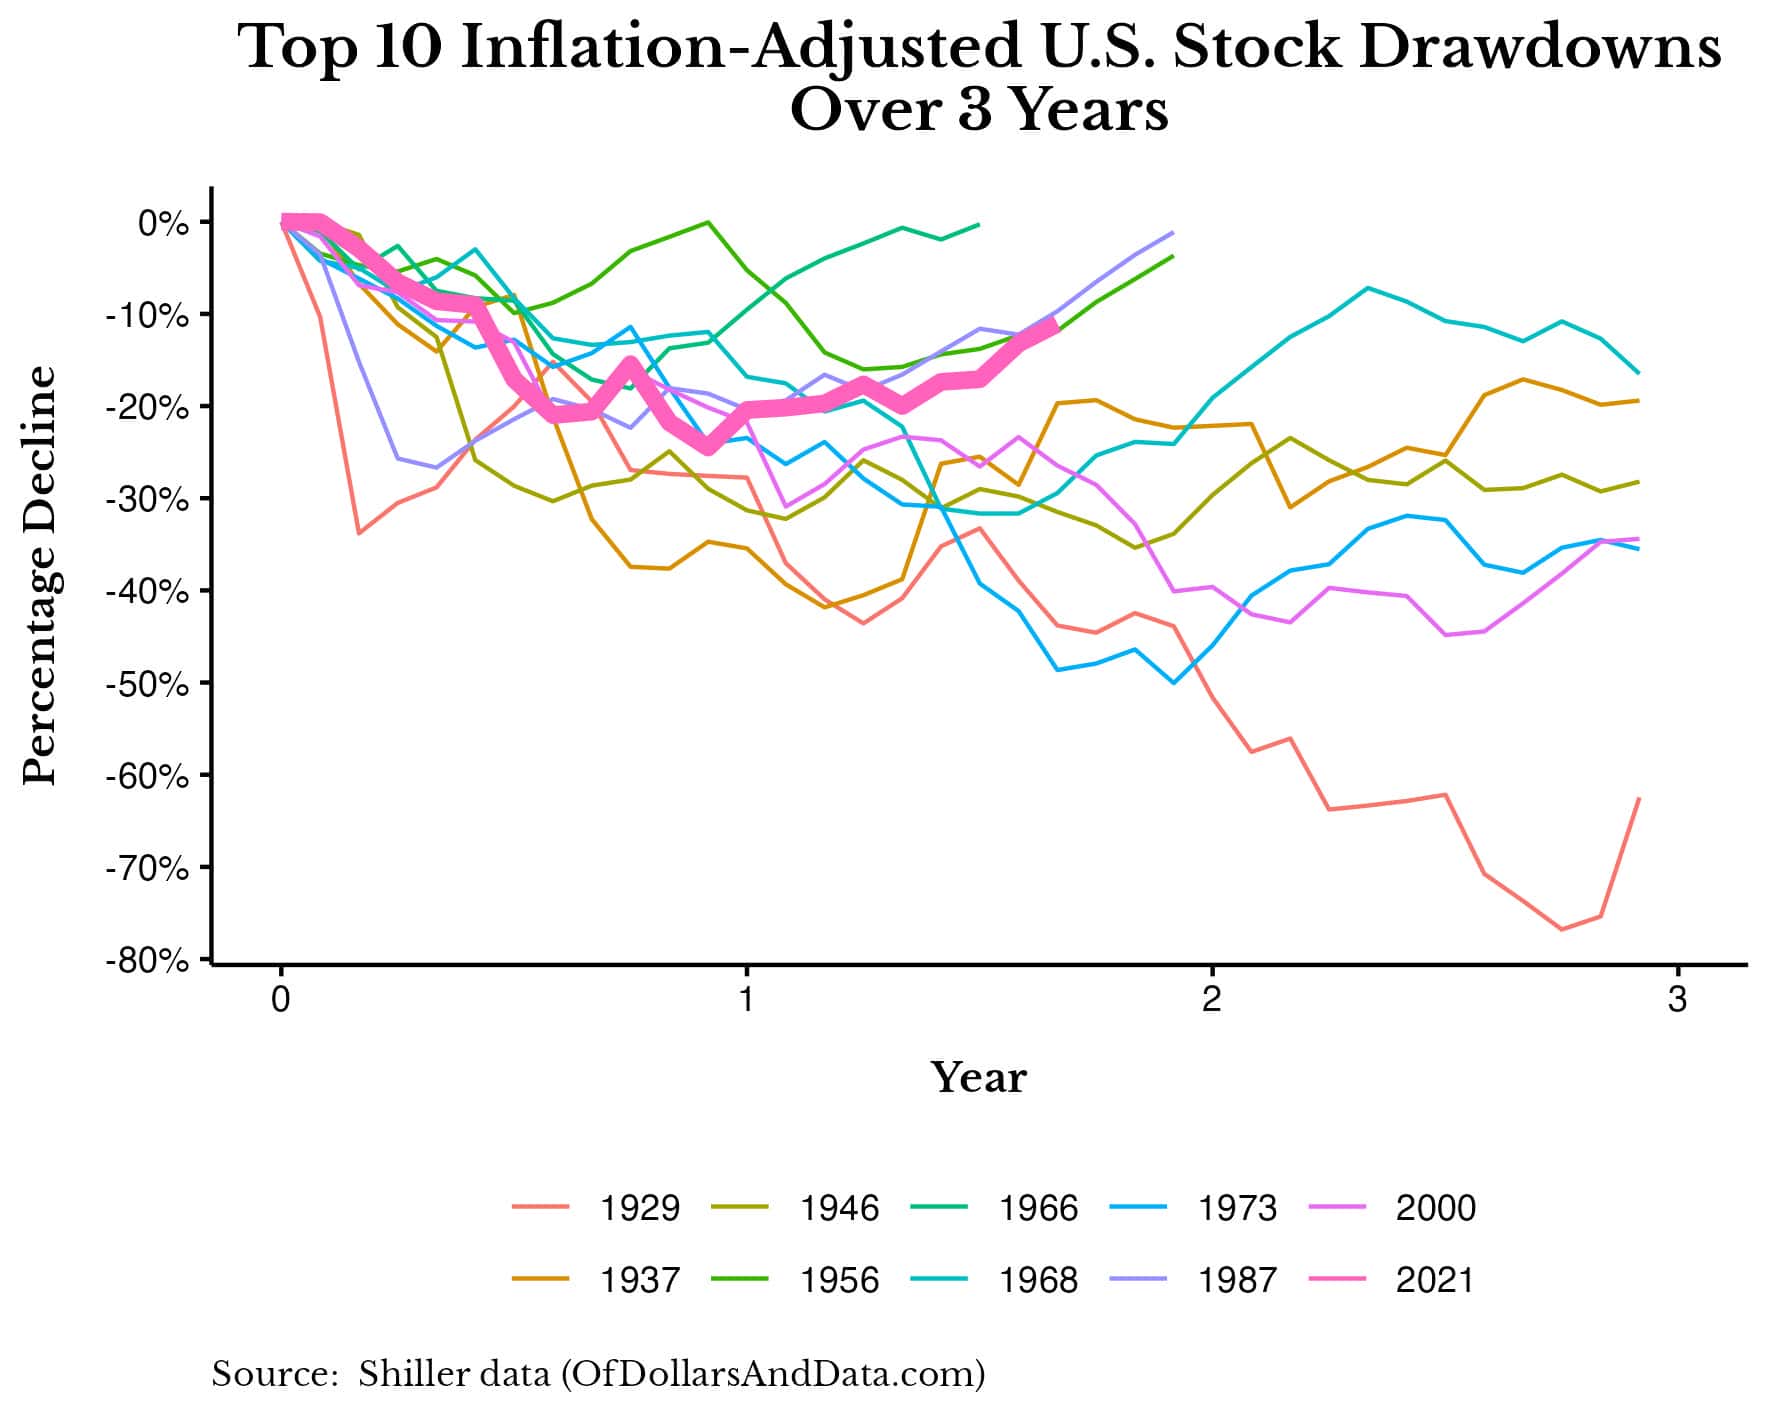 Chart of the top 10 inflation-adjusted drawdowns in U.S. stocks over their first 3 years.